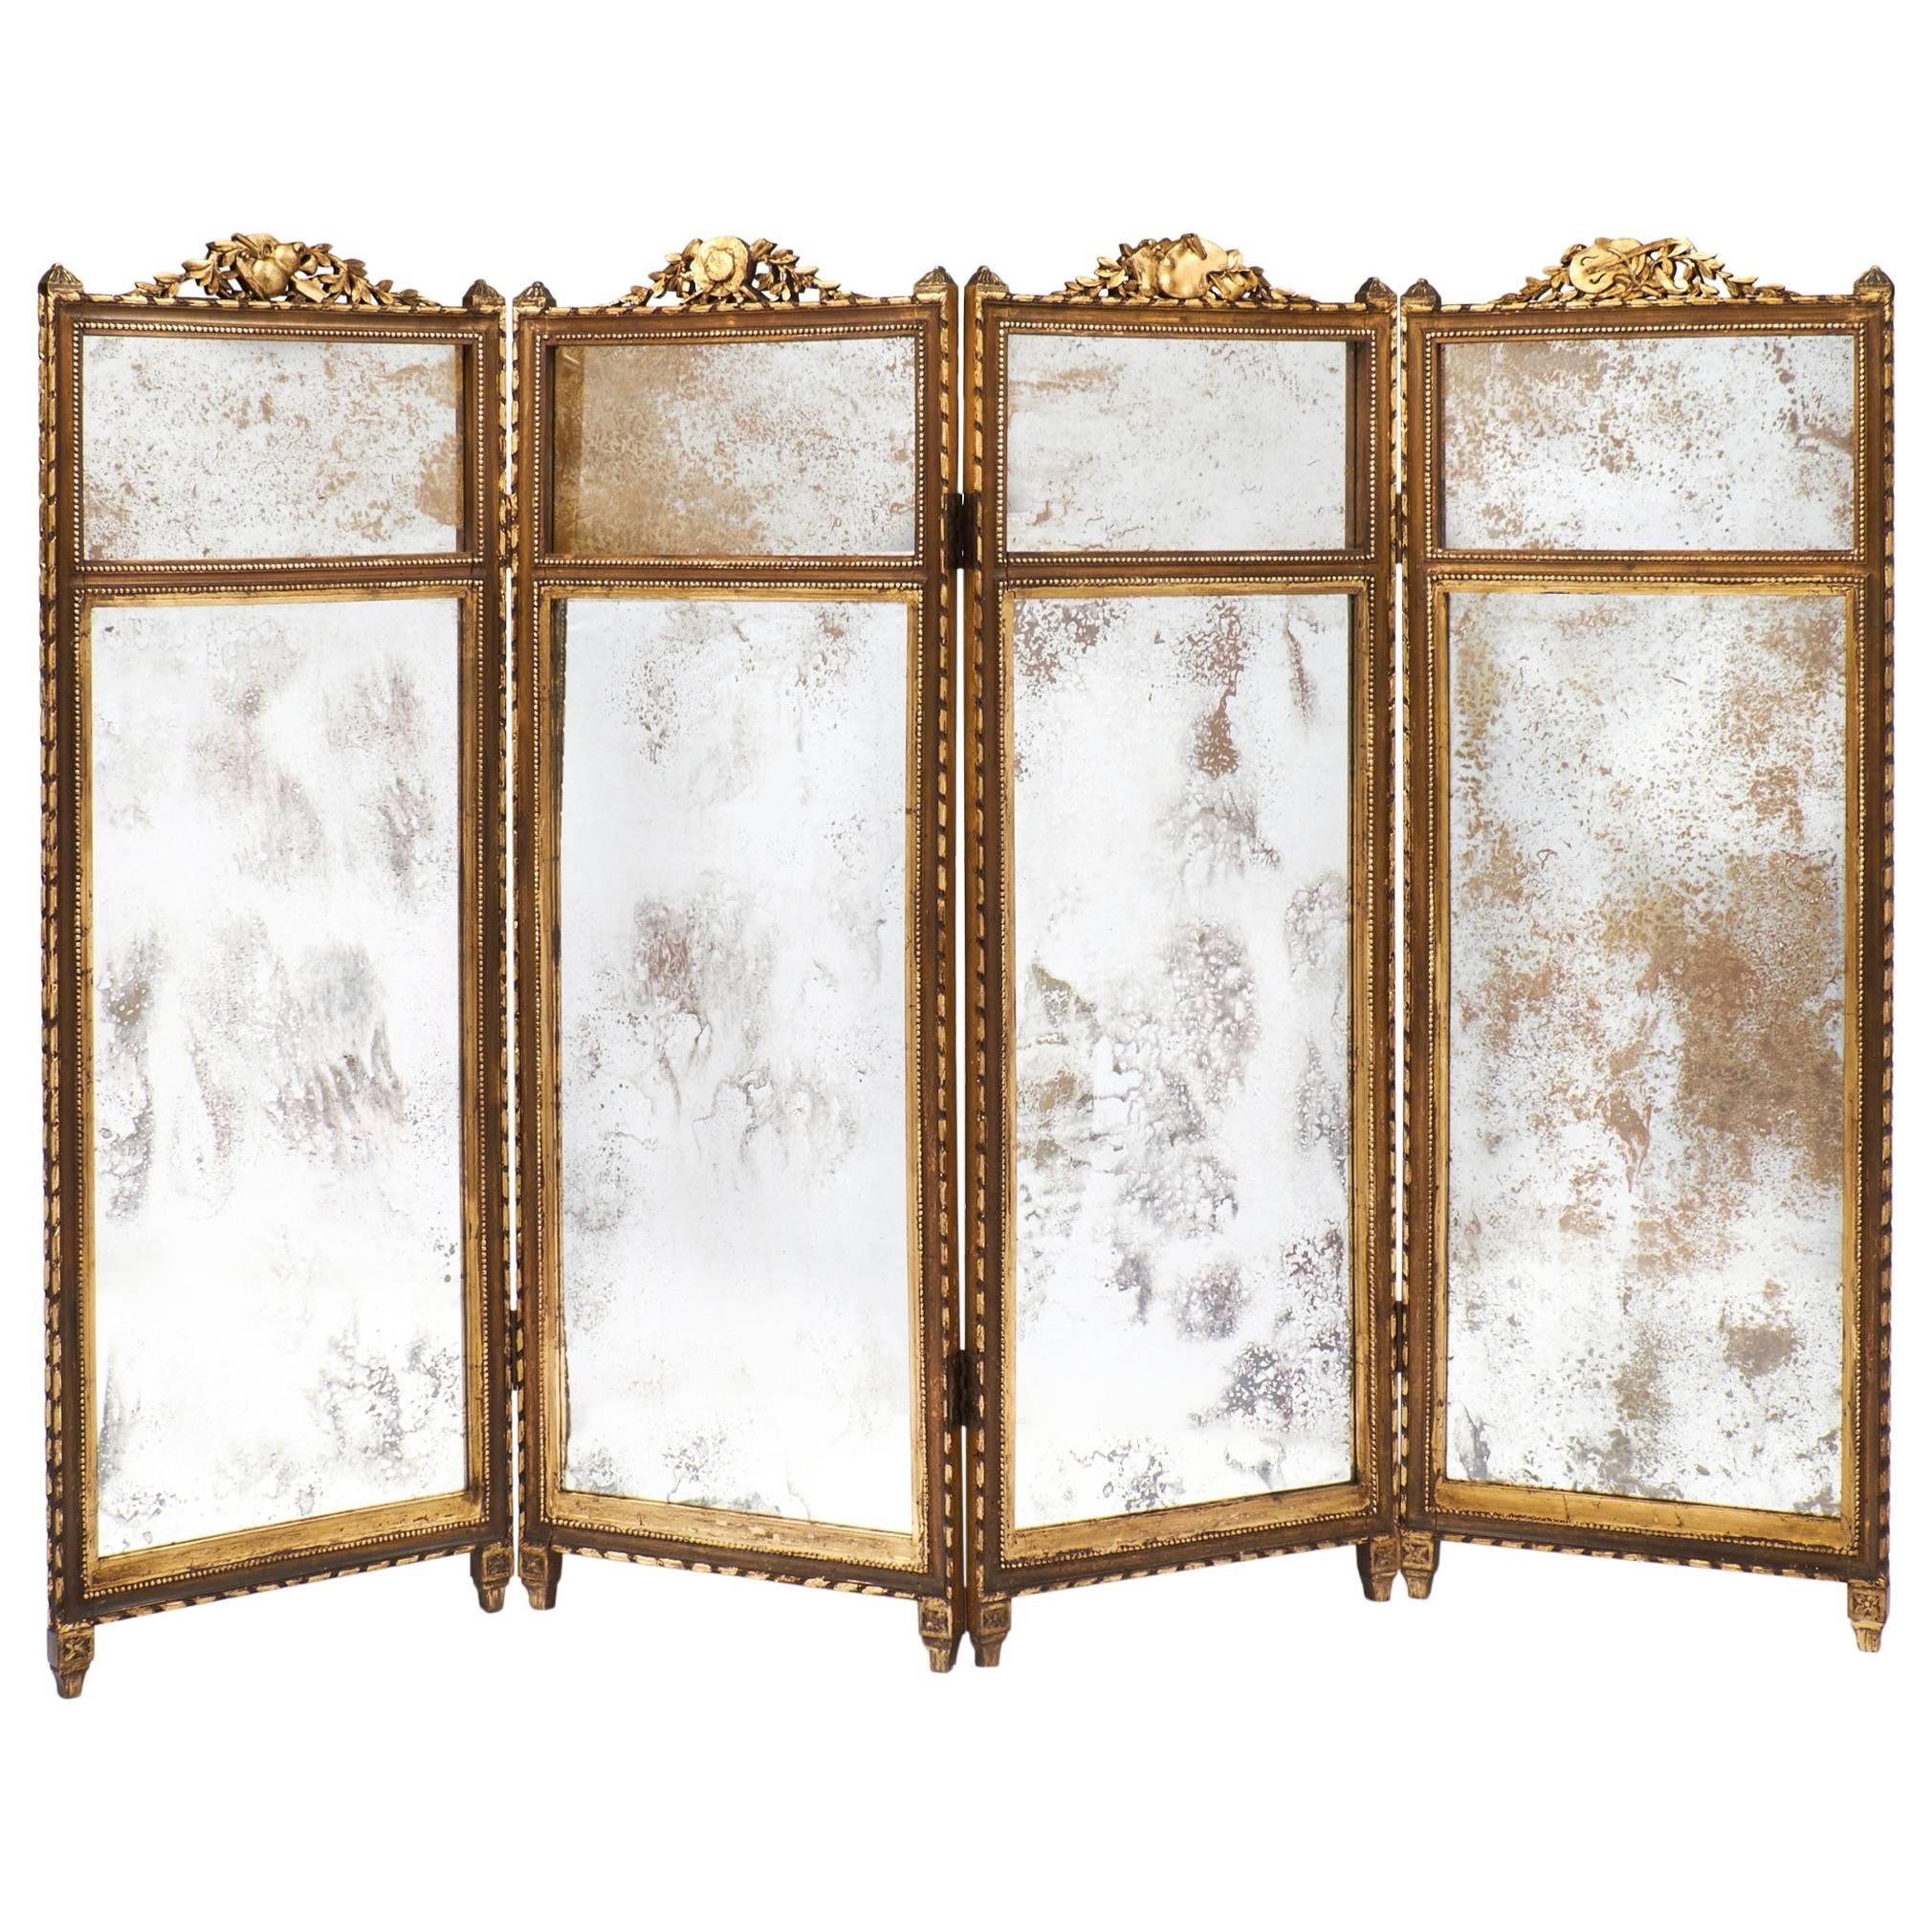 French Louis XVI Gilt and Mirrored Folding Screen